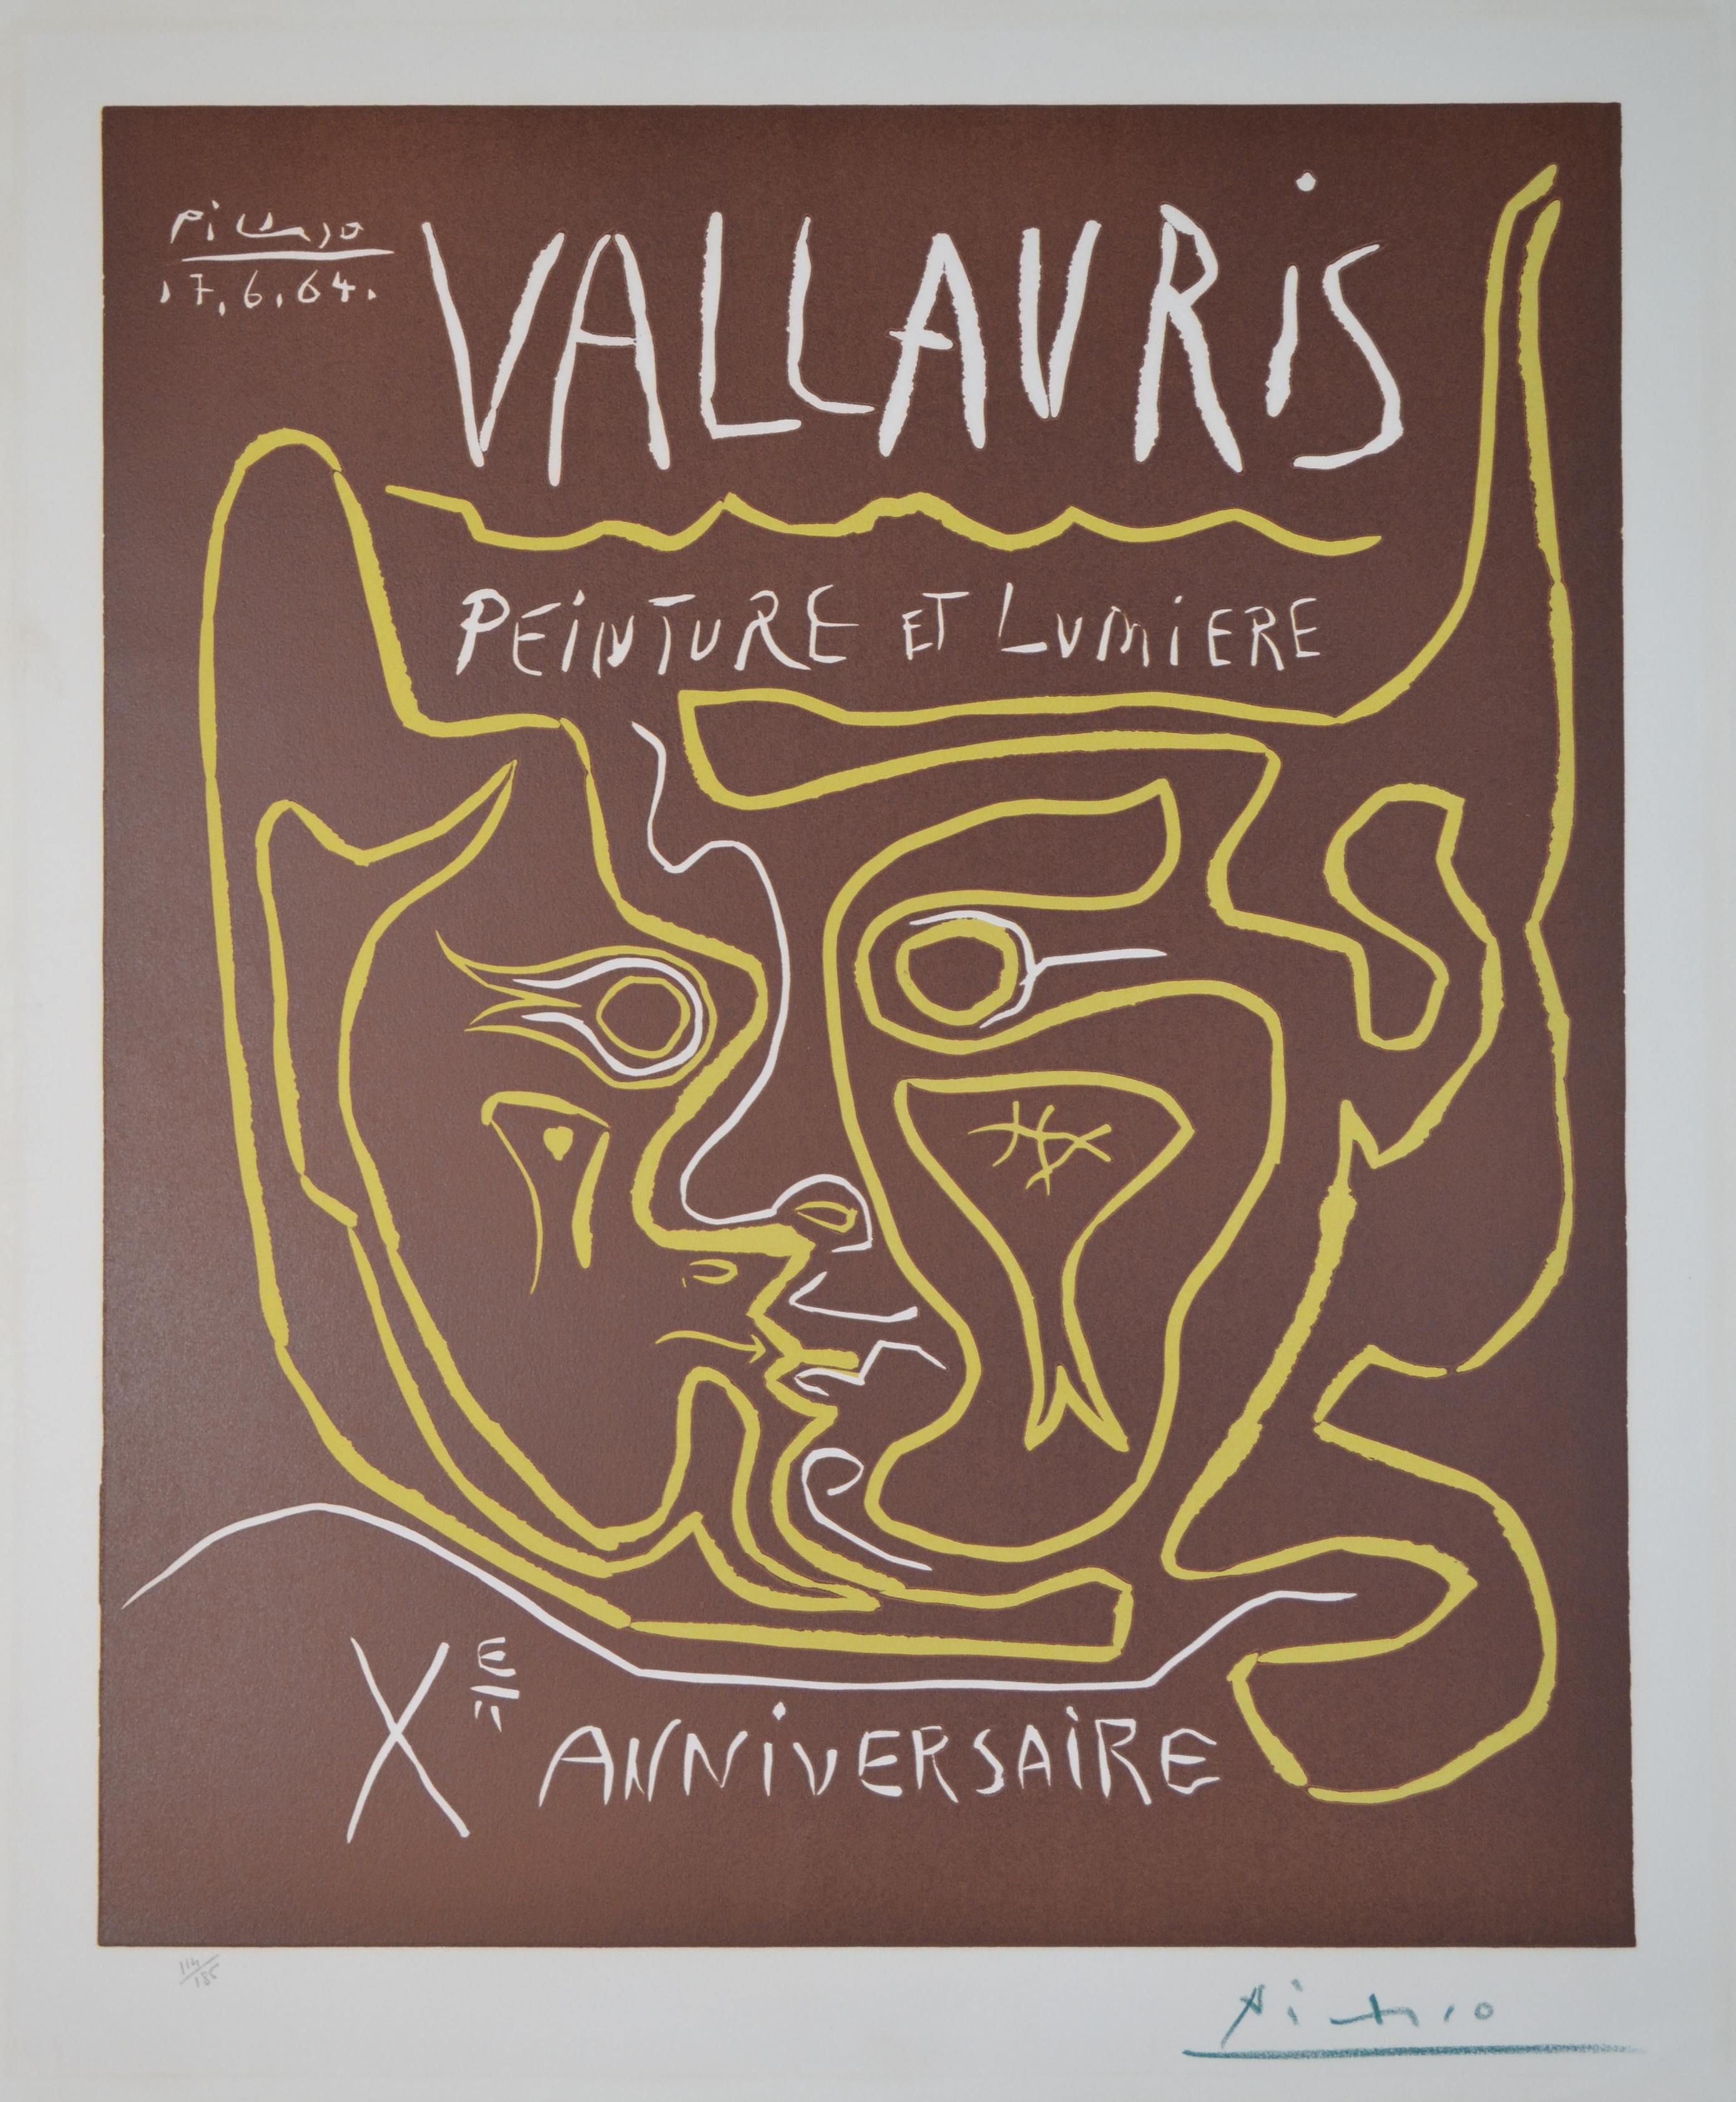 Vallauris Exhibition - B1850 - Print by Pablo Picasso